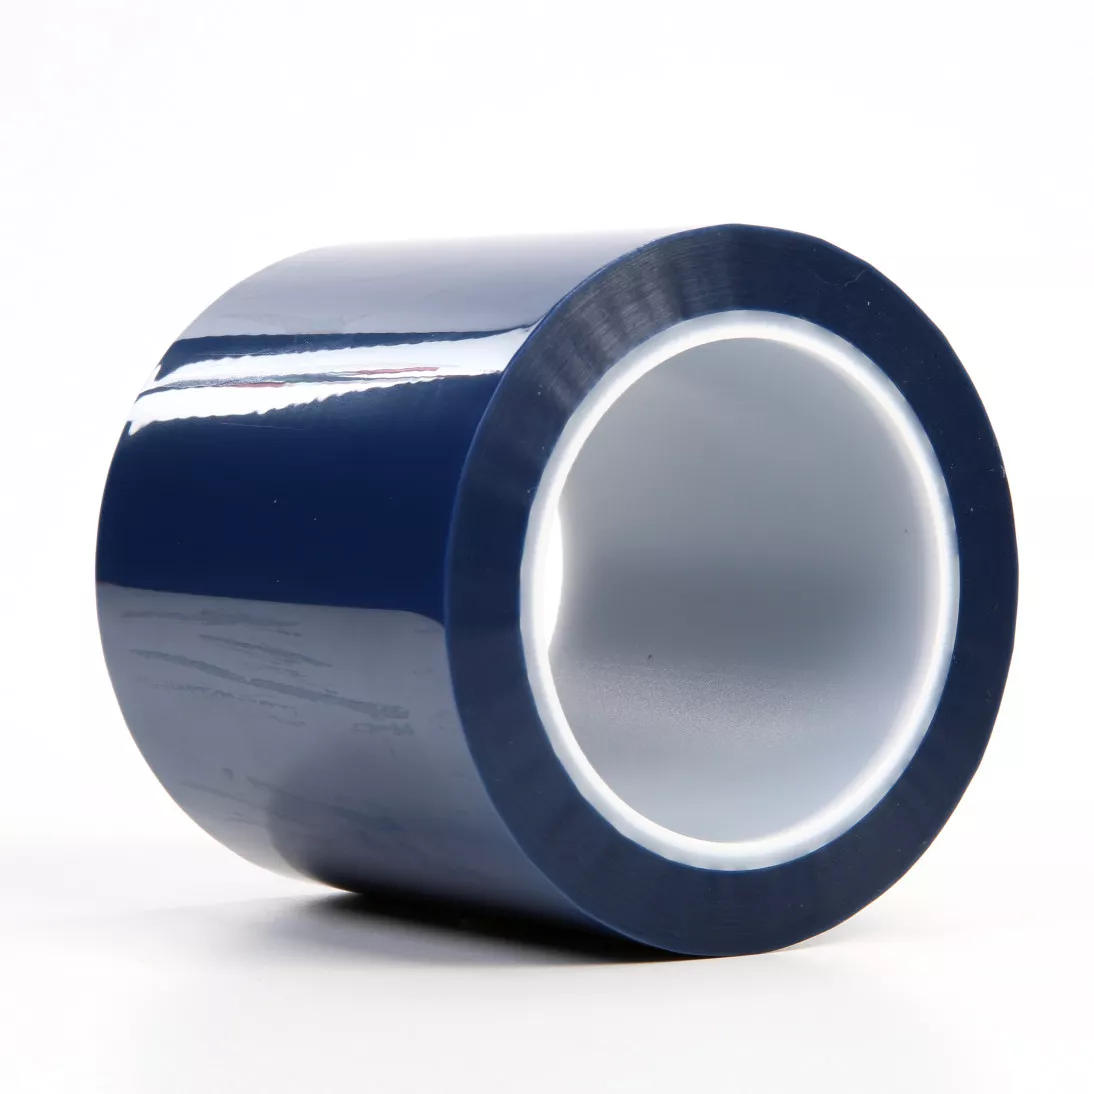 3M™ Polyester Tape 8991, Blue, 4 in x 72 yd, 2.4 mil, 8 rolls per case